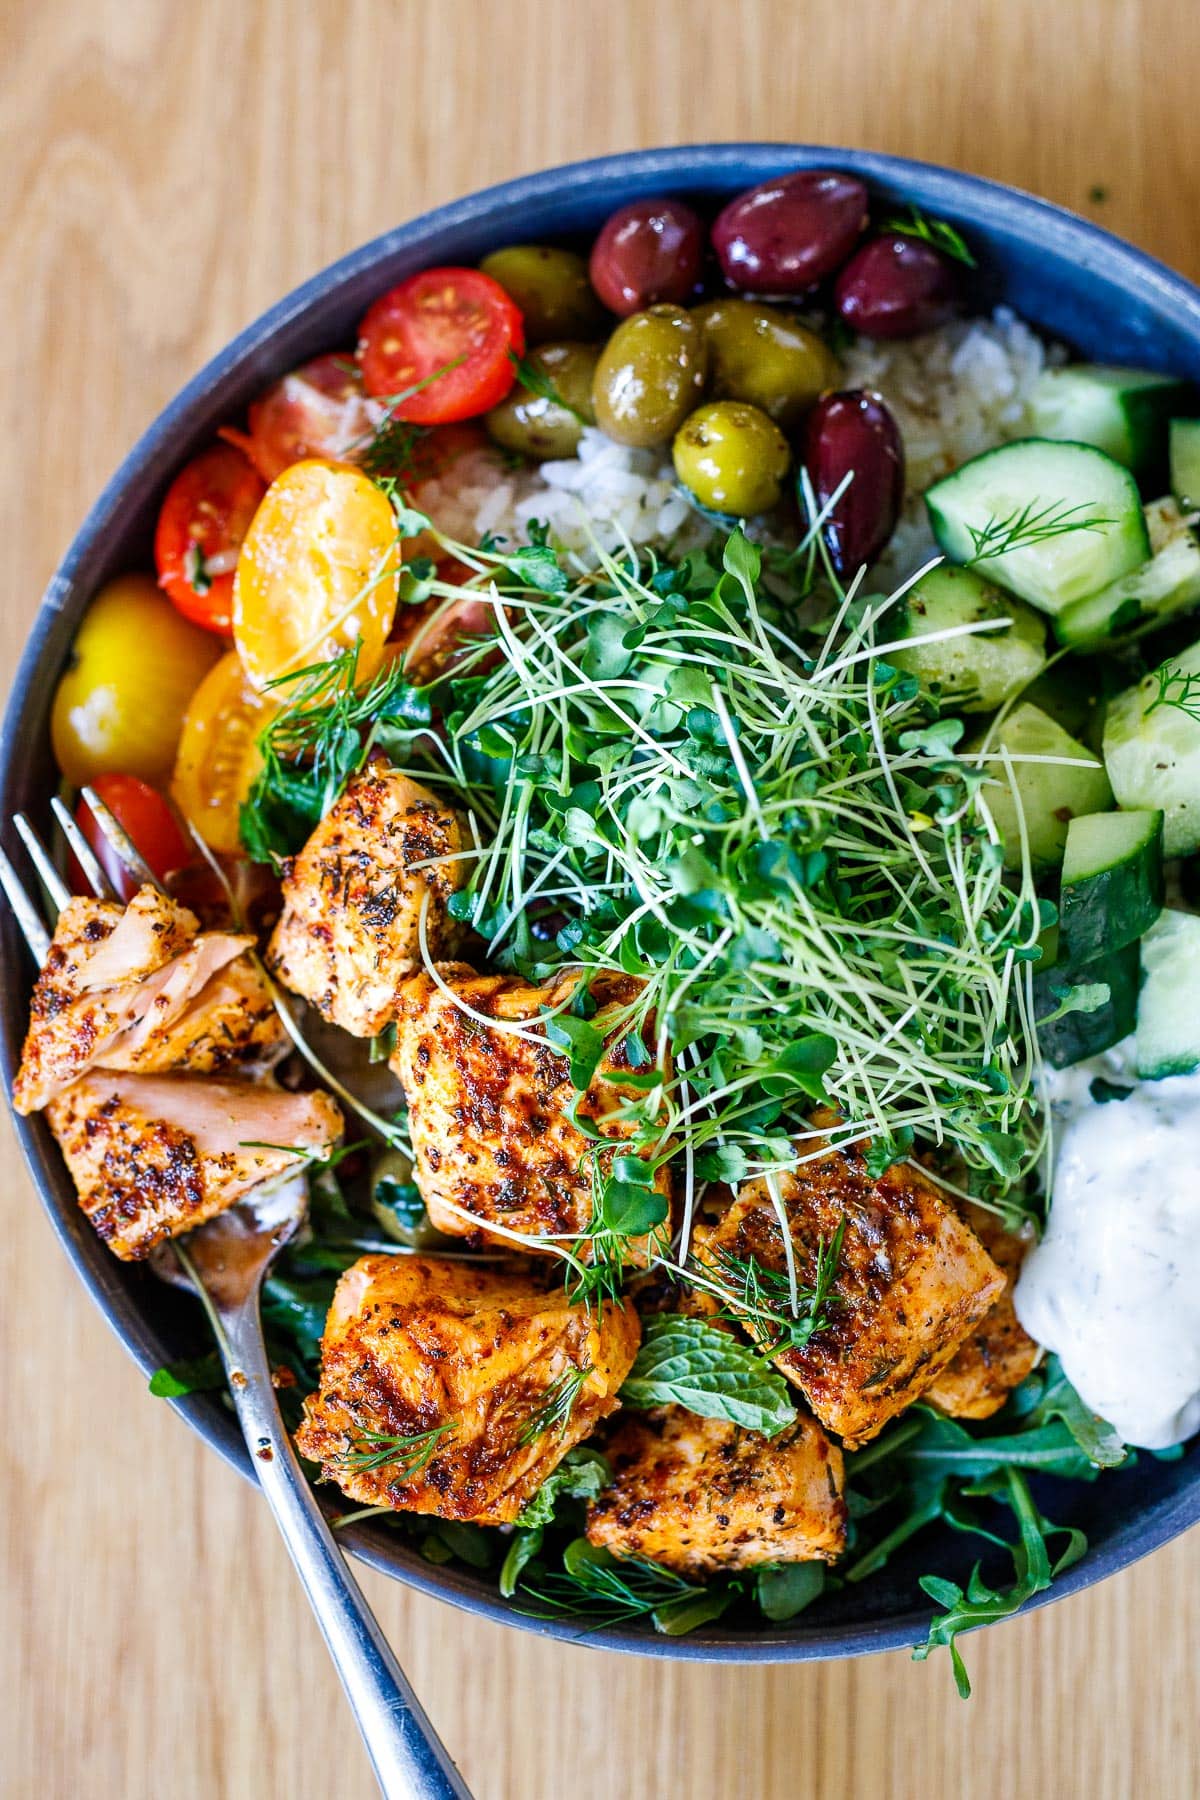 Our 25 BEST Salmon Recipes: Greek Salmon Bowl with rice, greens, olives, tomatoes, cucumber, tzatziki and greek dressing.